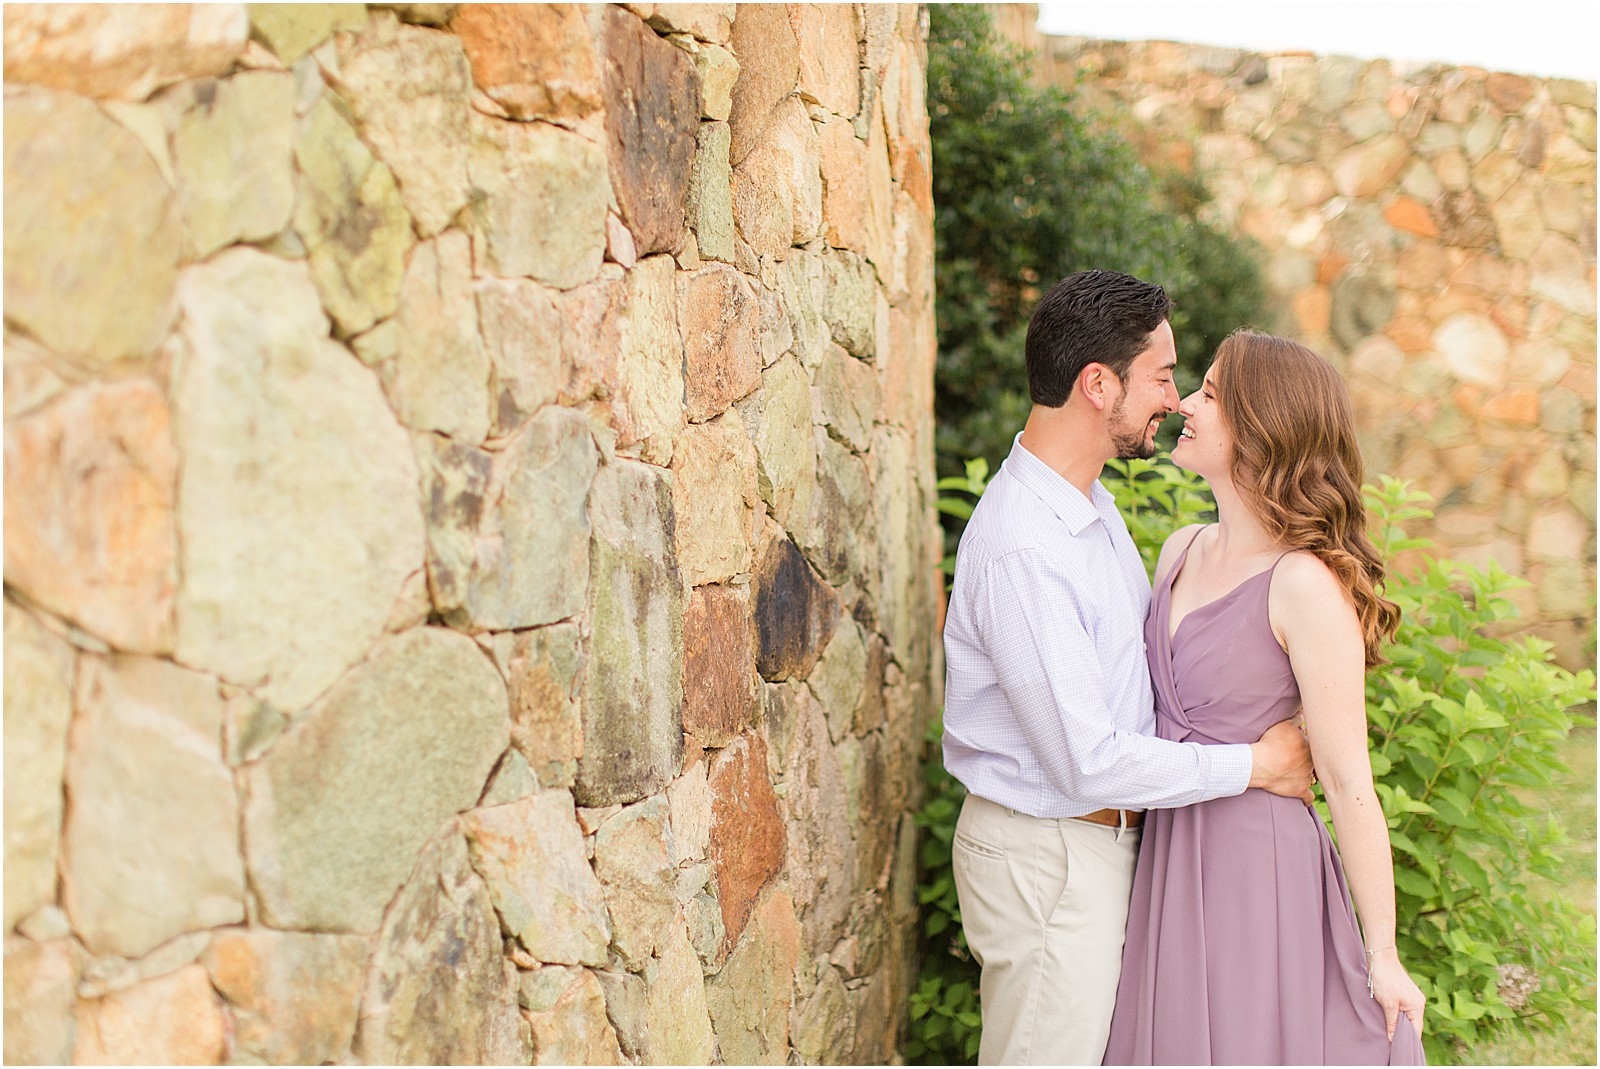 A Stone Tower Winery Leesburgh Engagement Session | Caitlin and Jason 006.jpg